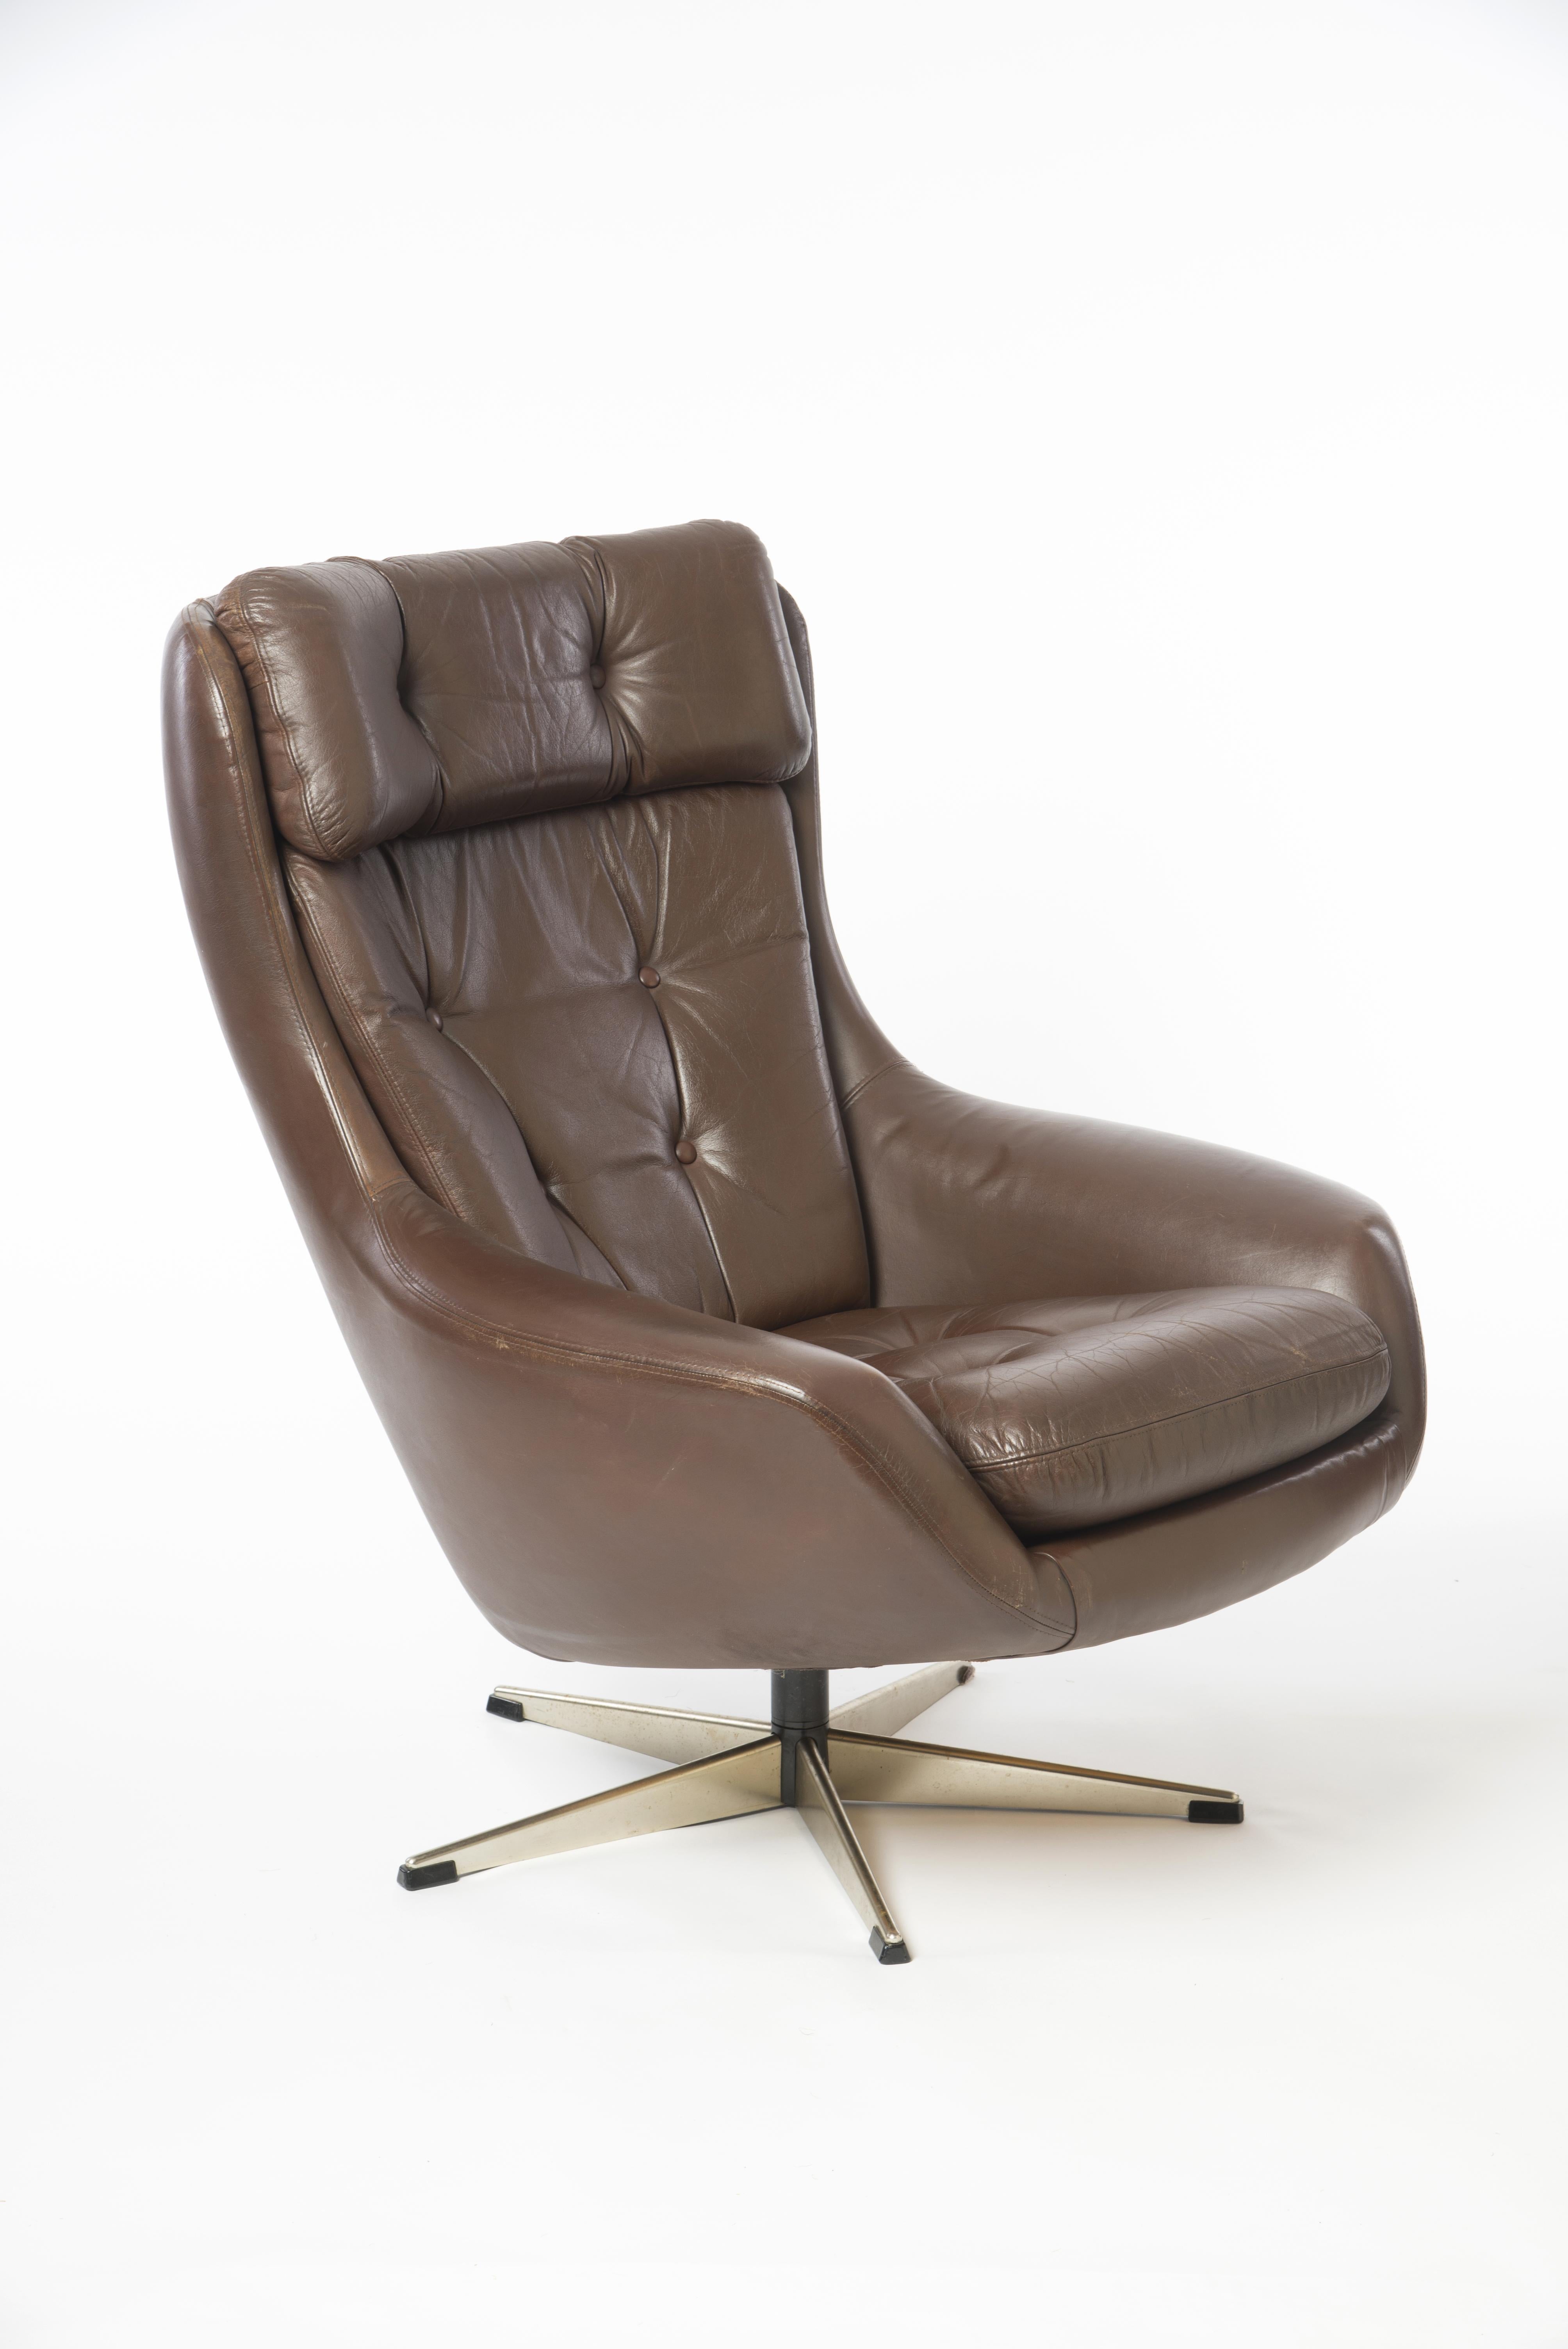 This pair of midcentury leather swivel chairs by the designer H.W. Klein are in exceptionally good condition. The leather is almost flawless and only shows minor wear. Wonderful relaxing chairs with great design. Fantastic option for designing